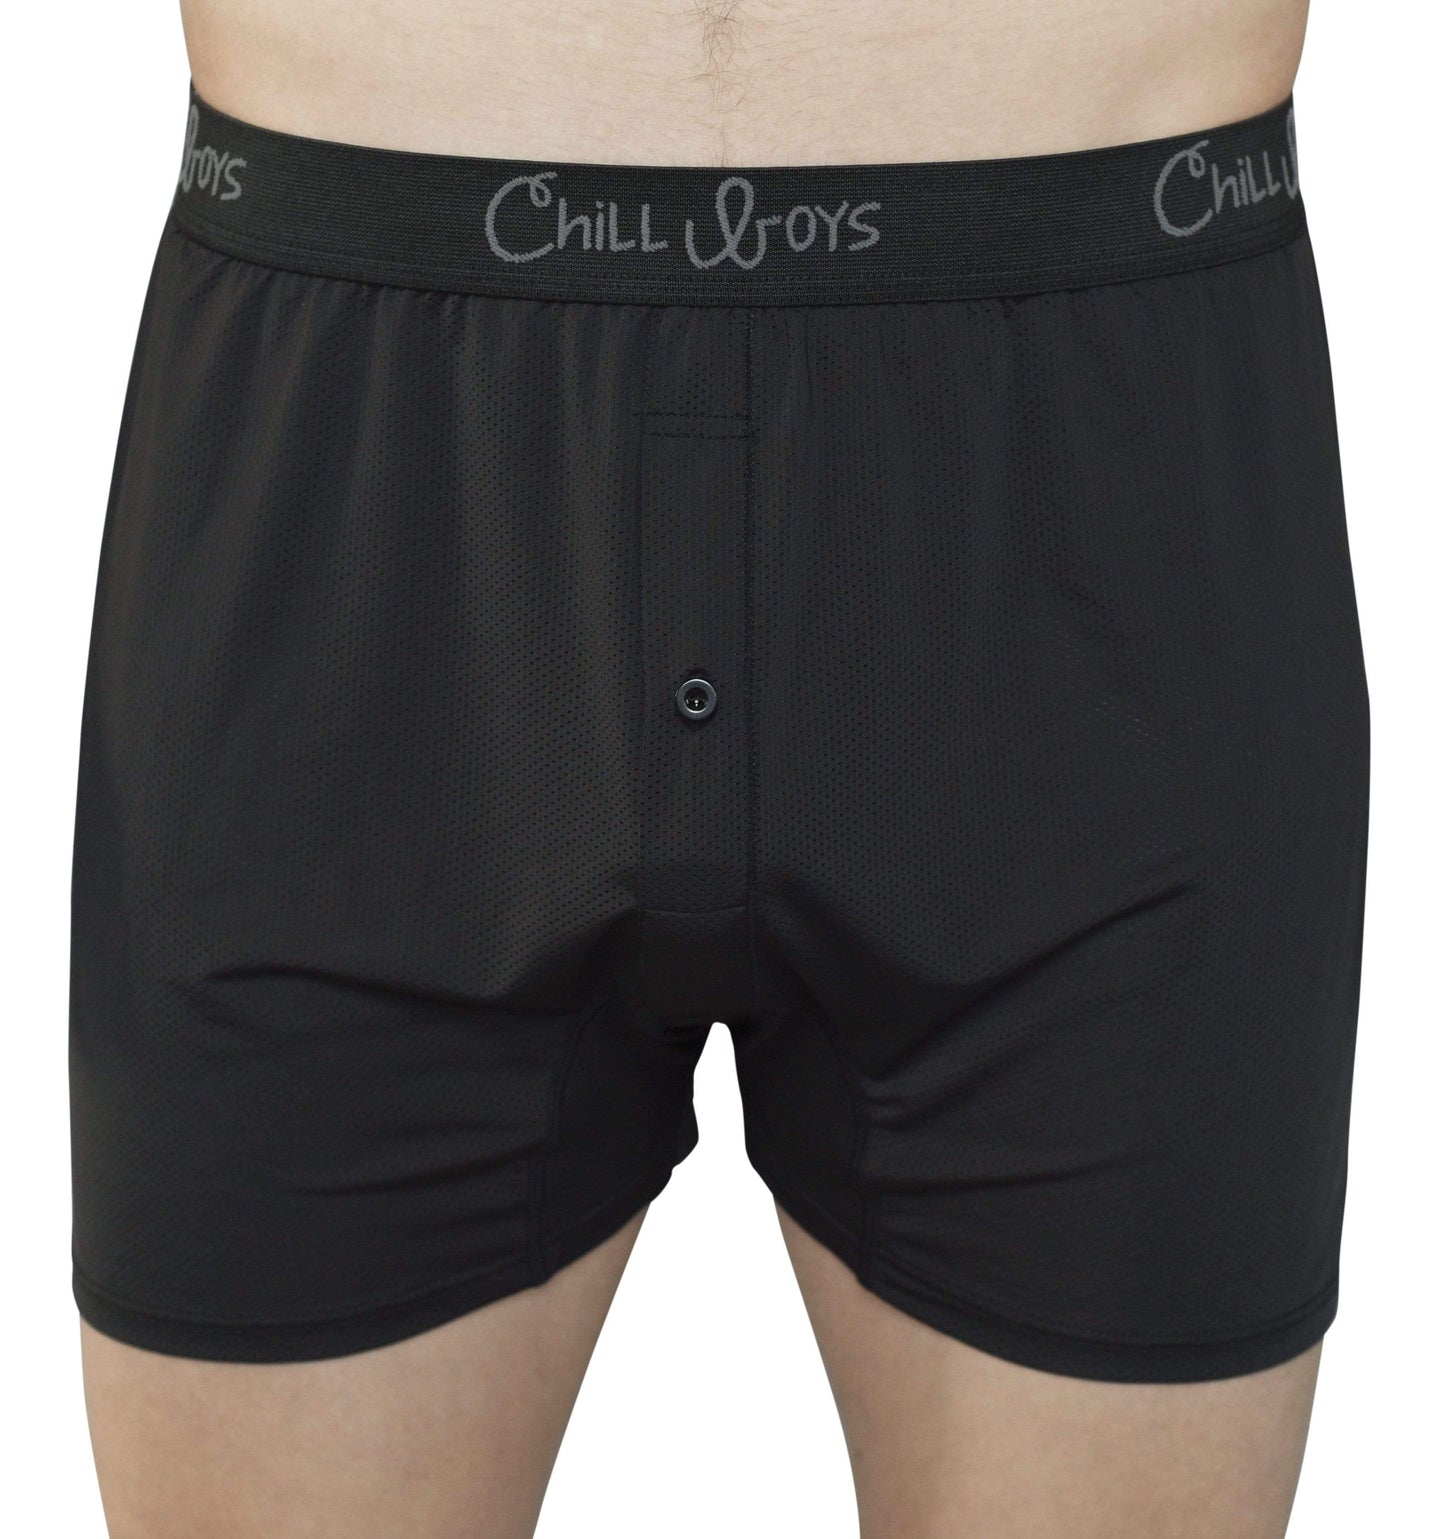 Chill Boys Performance Boxers - Cool, Soft, Breathable Men's Bamboo Underwear